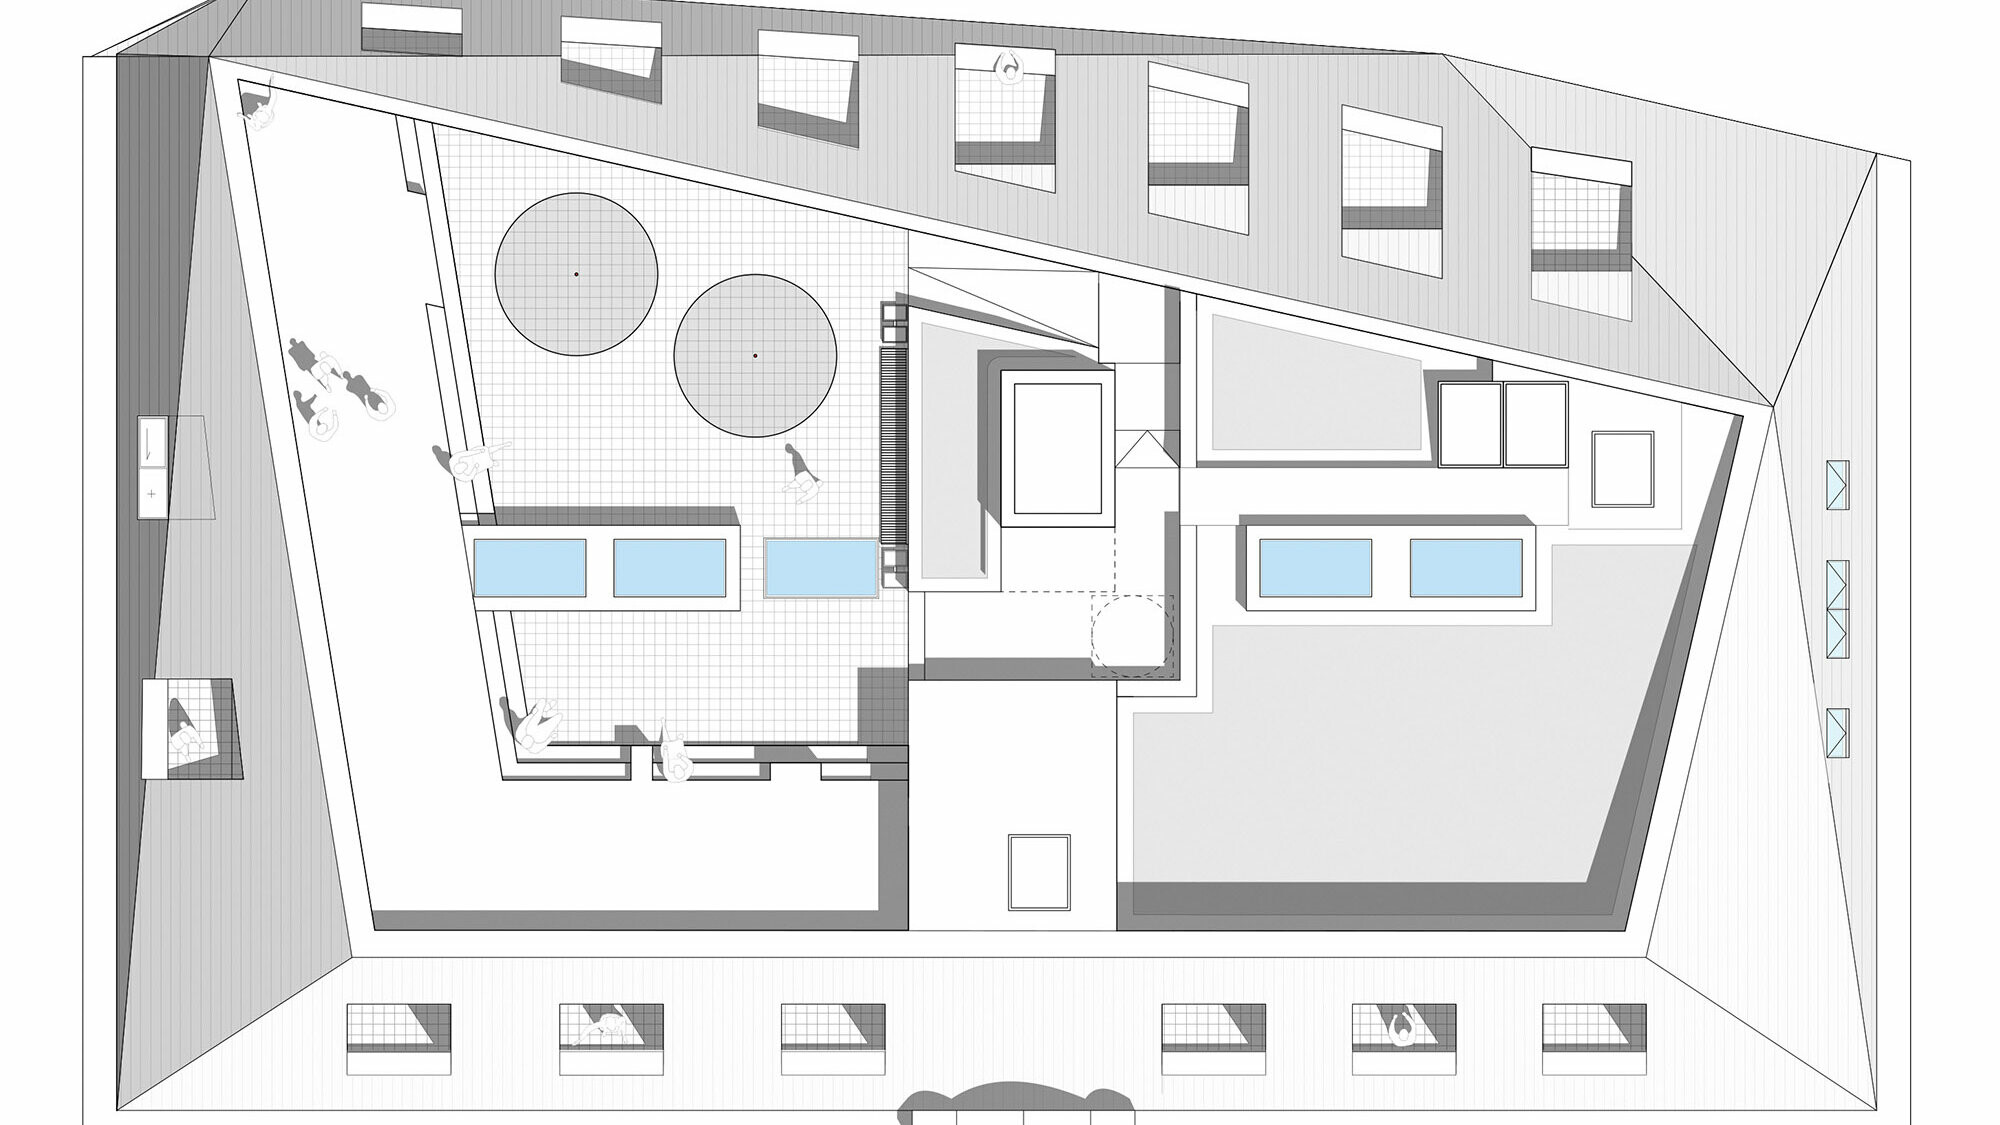 The roof plan of the converted building.